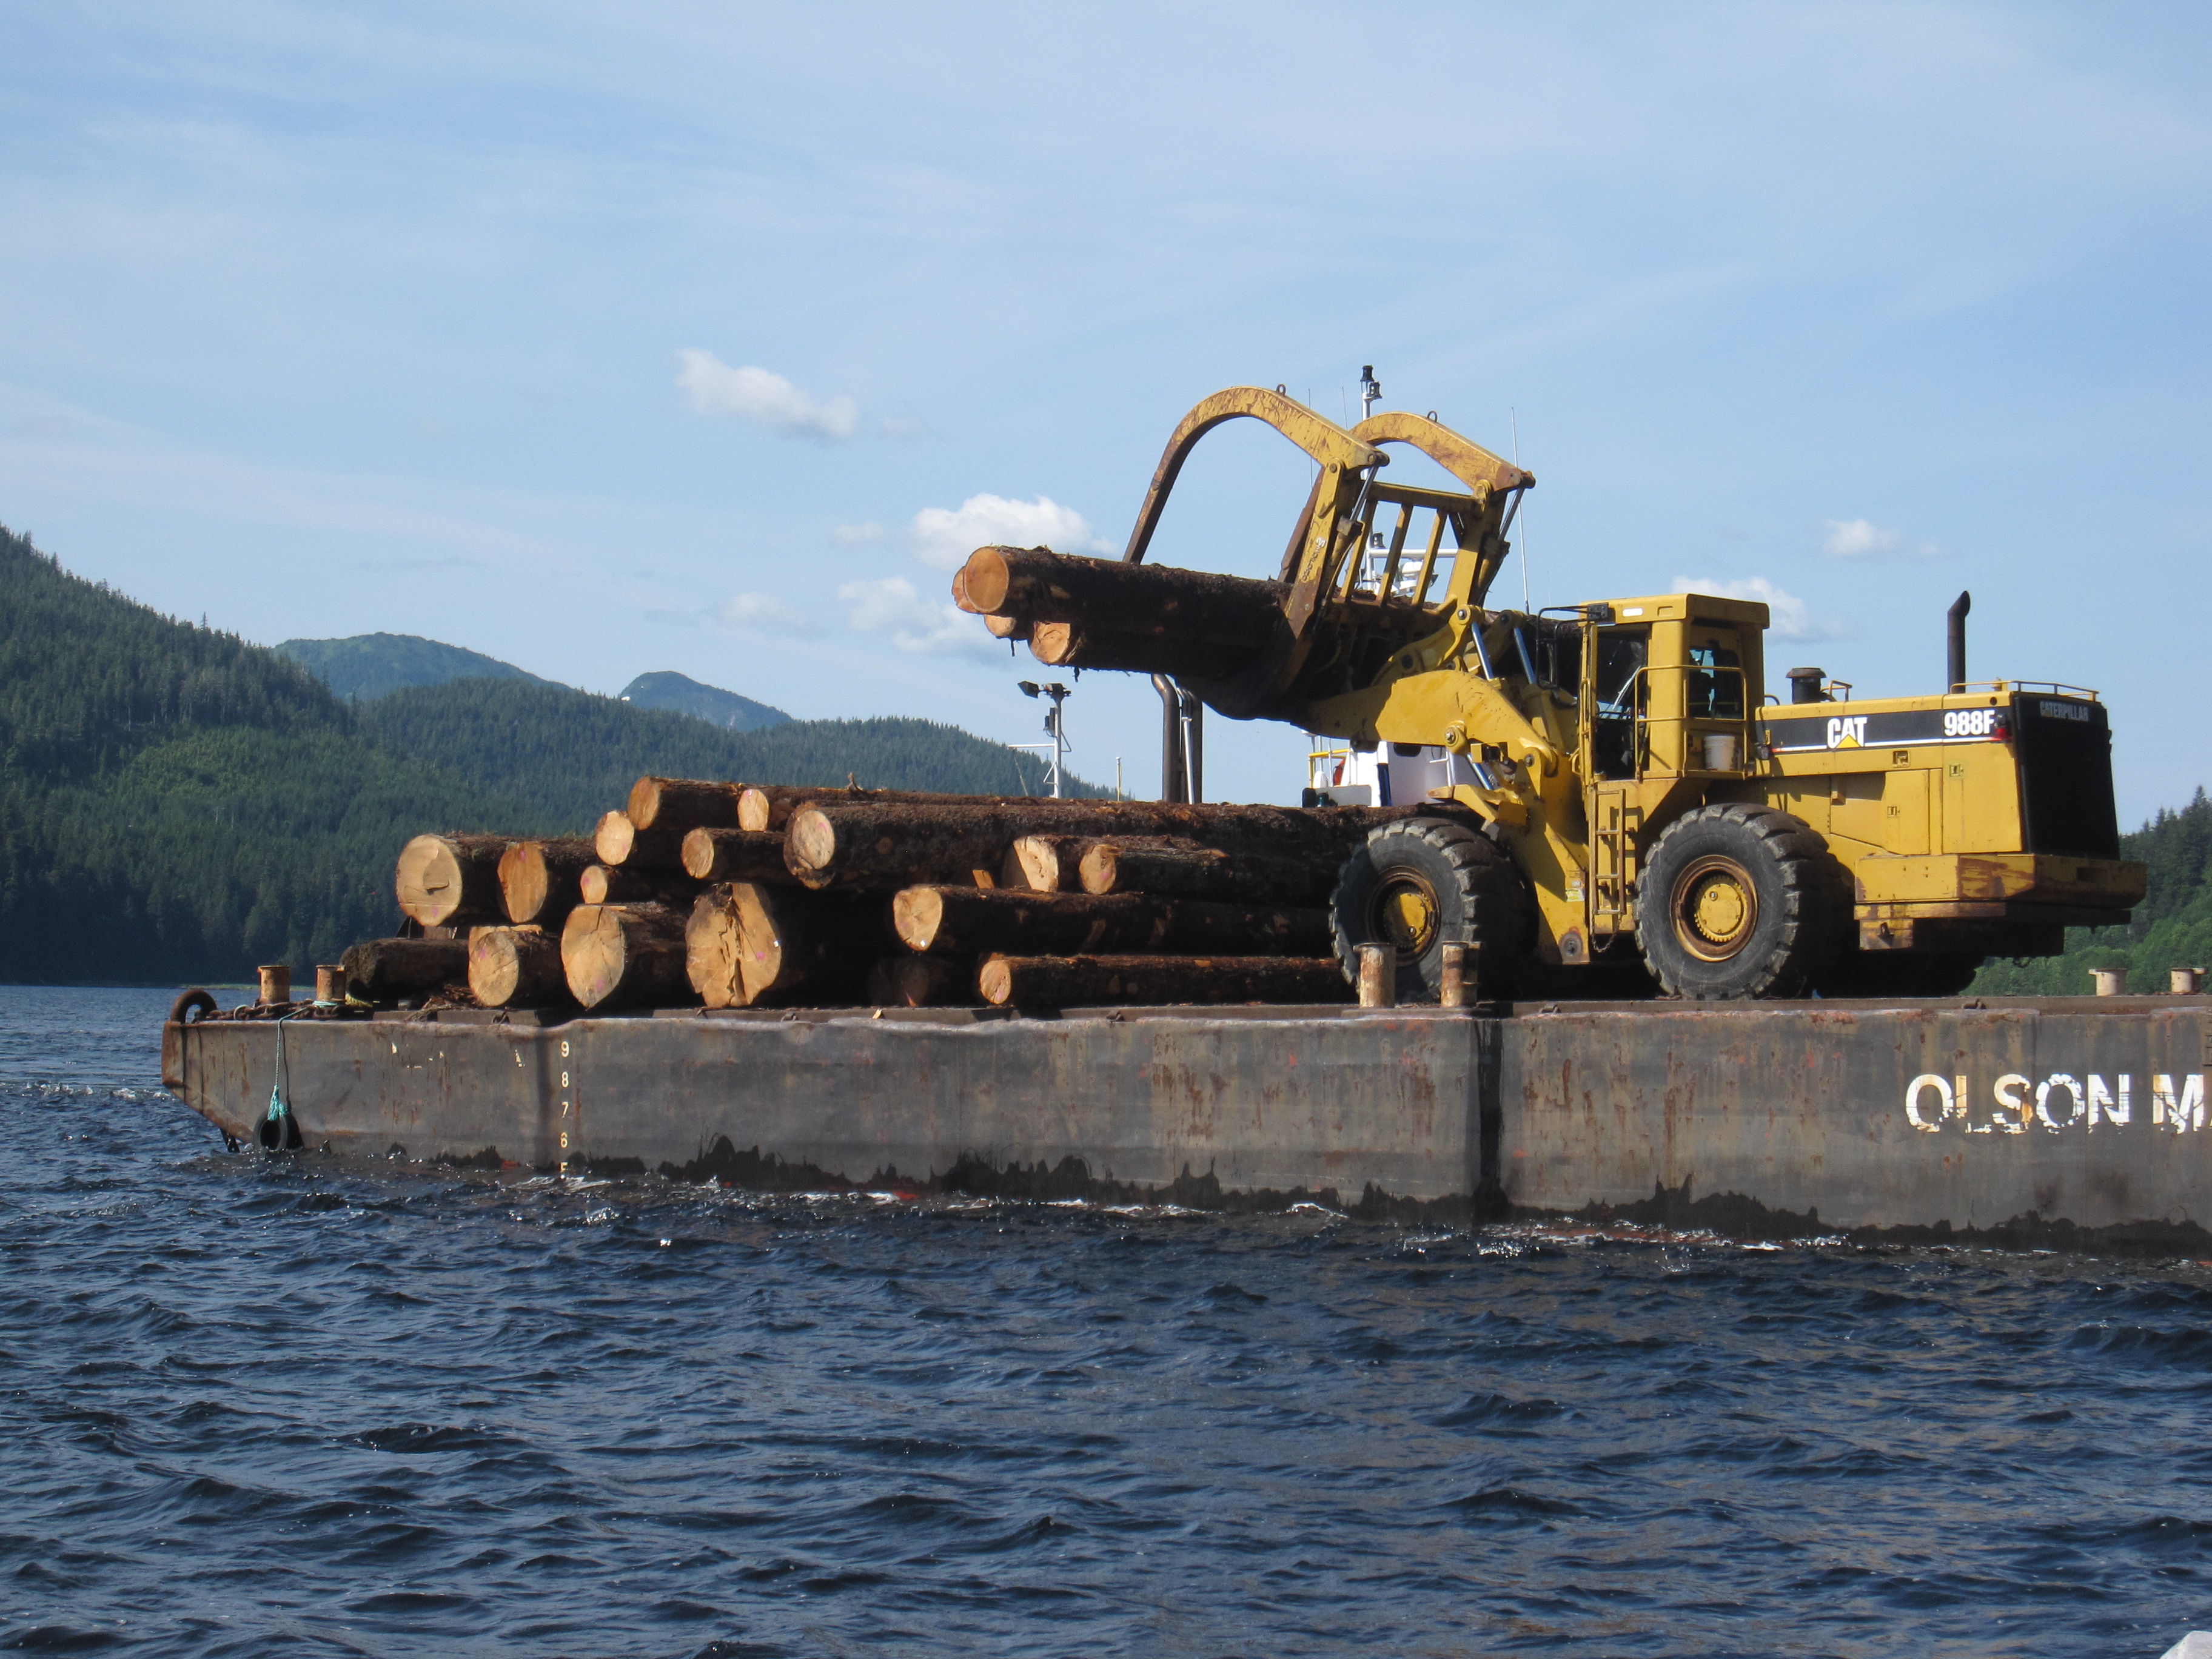 The Sealaska operation in Sitkoh Bay (Chichagof Island) loading their barge with large-diameter logs for transport to Huna, and then most likely to Asia.